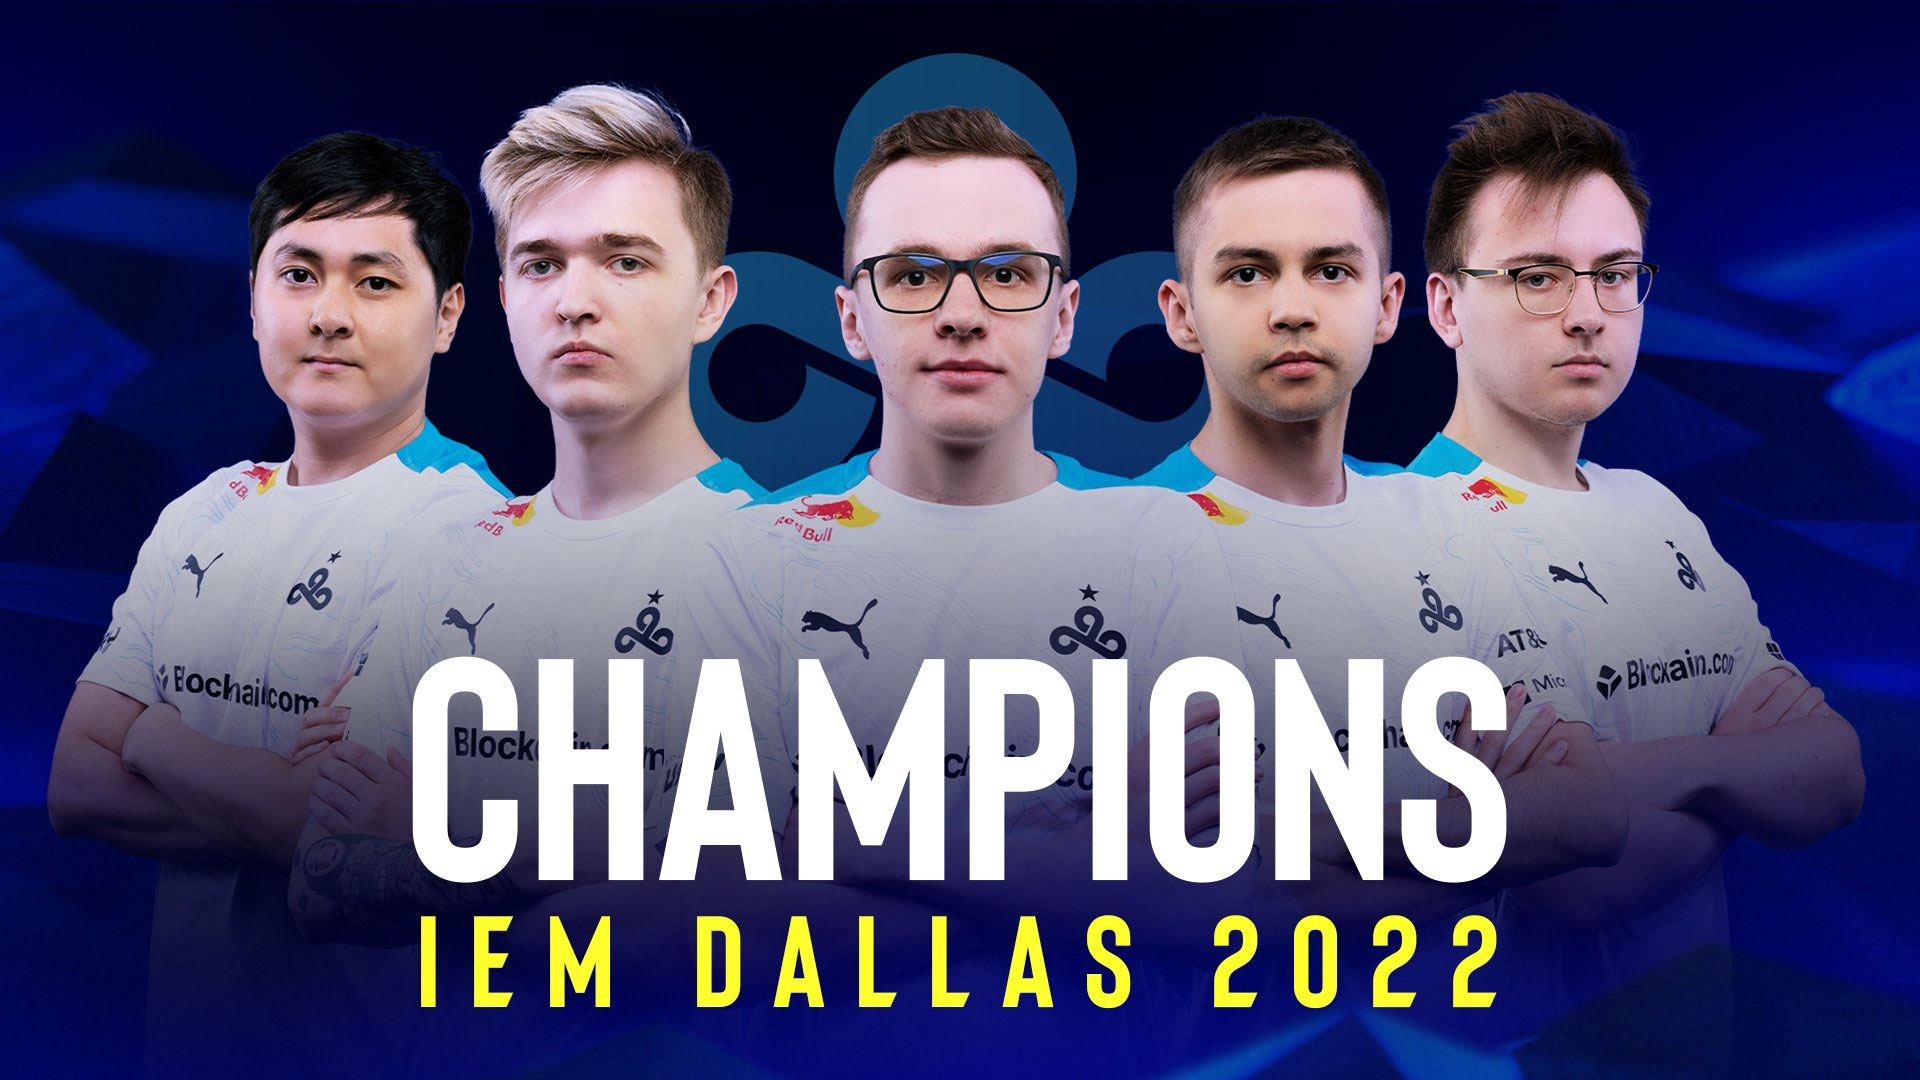 New Cloud9 roster claim the first championship